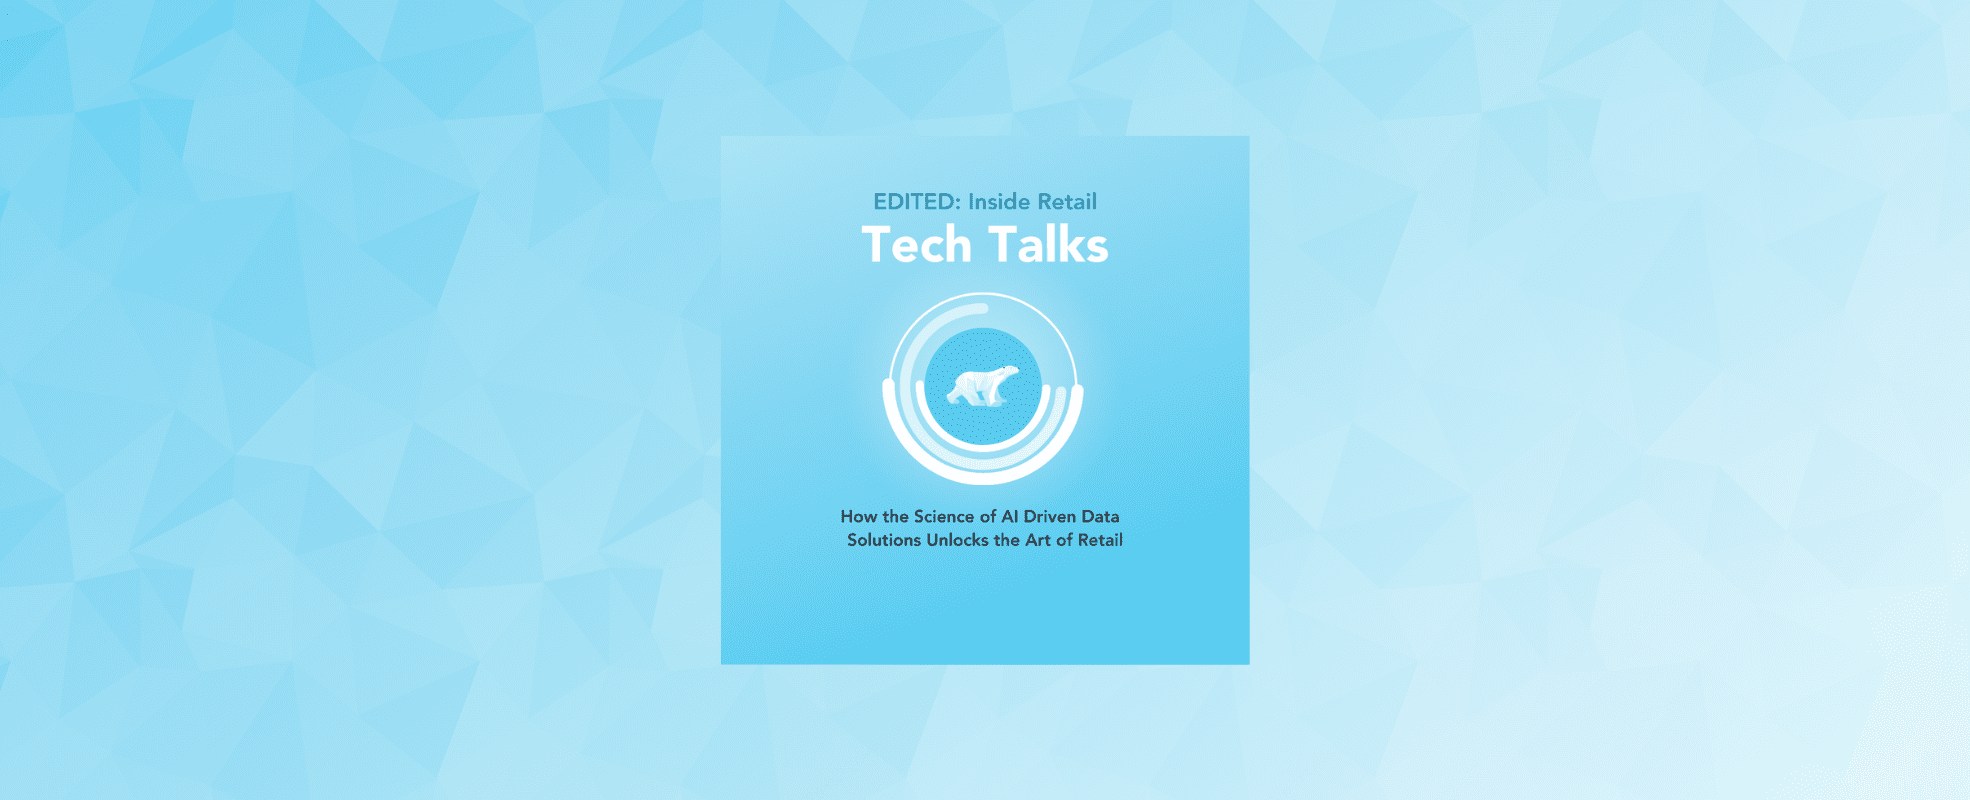 Inside Retail: Tech Talks - A New Five-Part Podcast Series from EDITED | EDITED